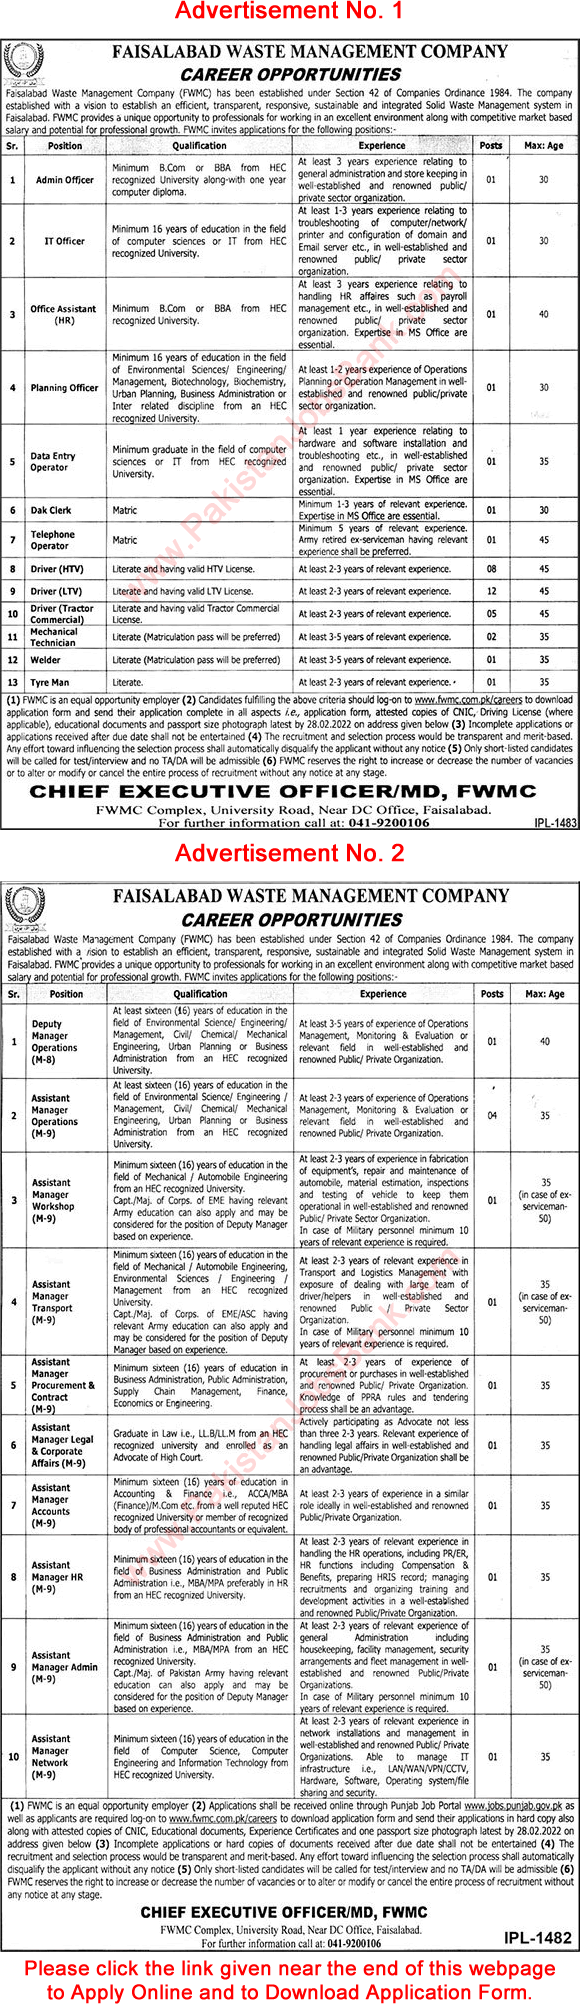 Faisalabad Waste Management Company Jobs February 2022 FWMC Online Application Form Drivers & Others Latest